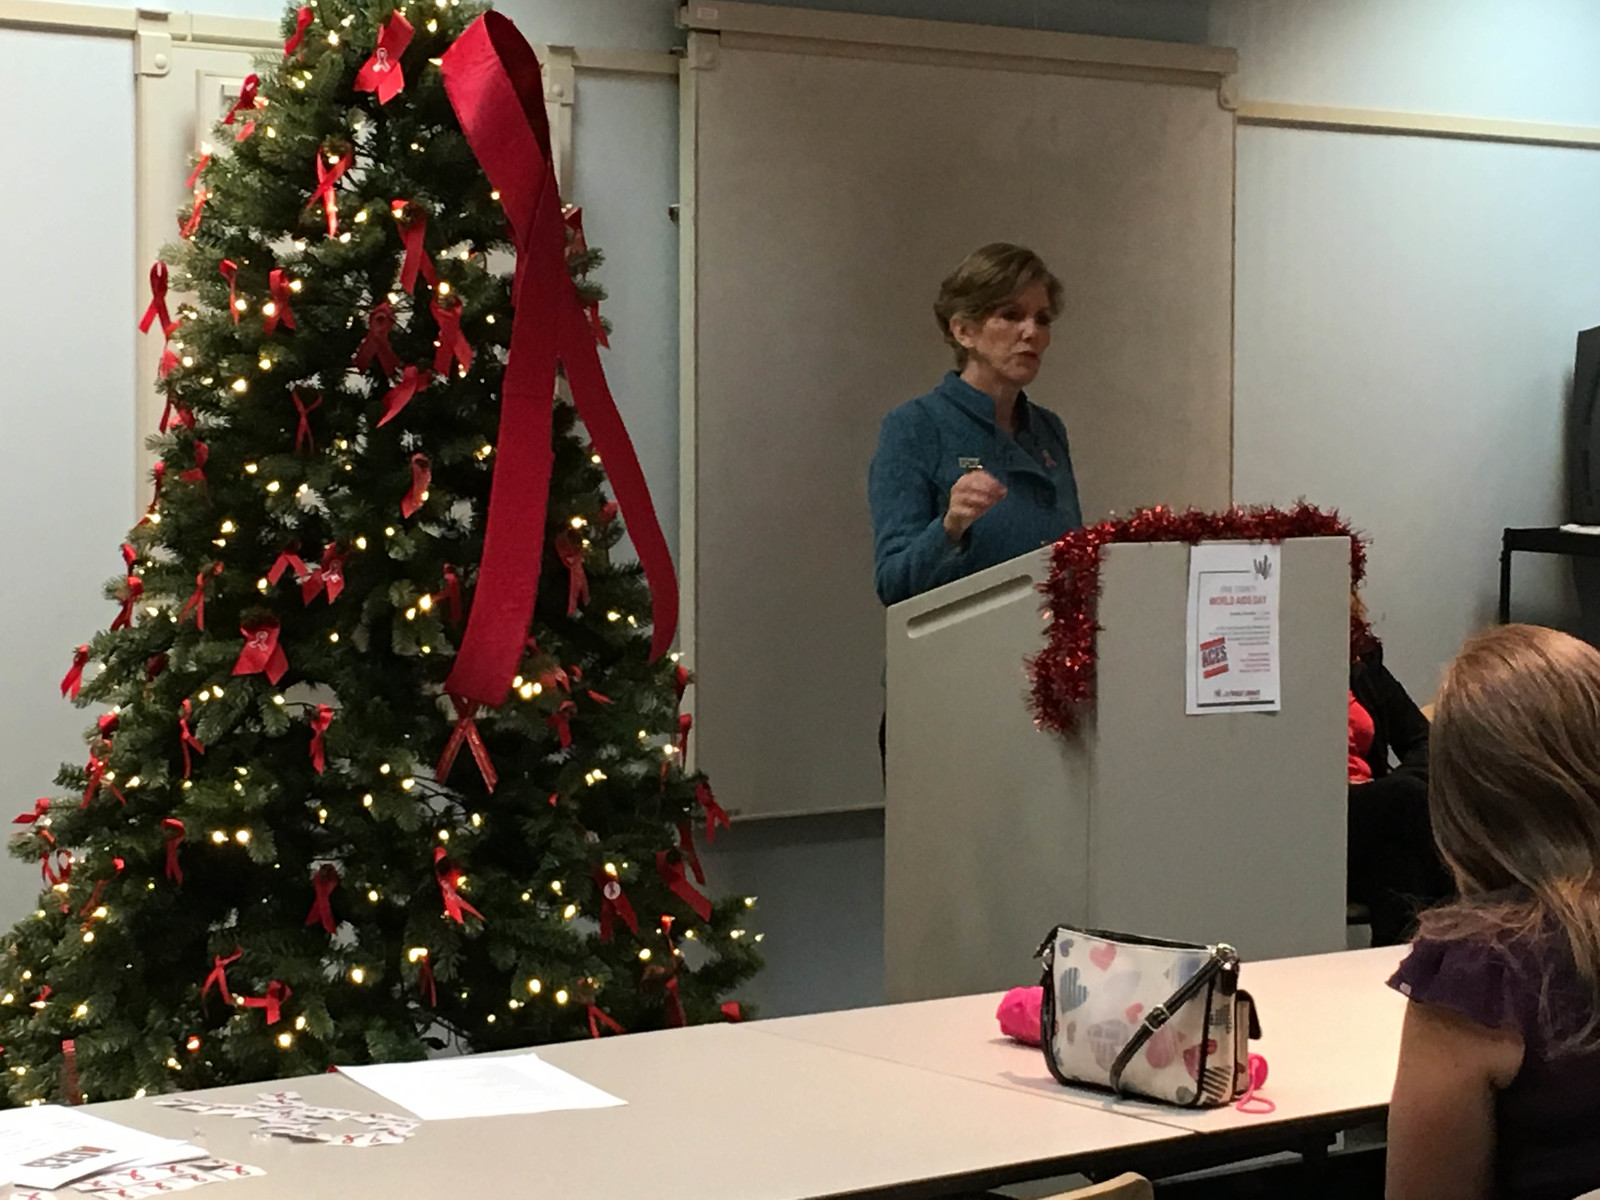 On Thursday, December 1, 2016, Erie County HIV Task Force had a presentation for World AIDS Day at the Blasco Public Library, 160 E Front St, Erie PA. The event included a display of AIDS quilt panels and other HIV-related art work. Speakers included Erie